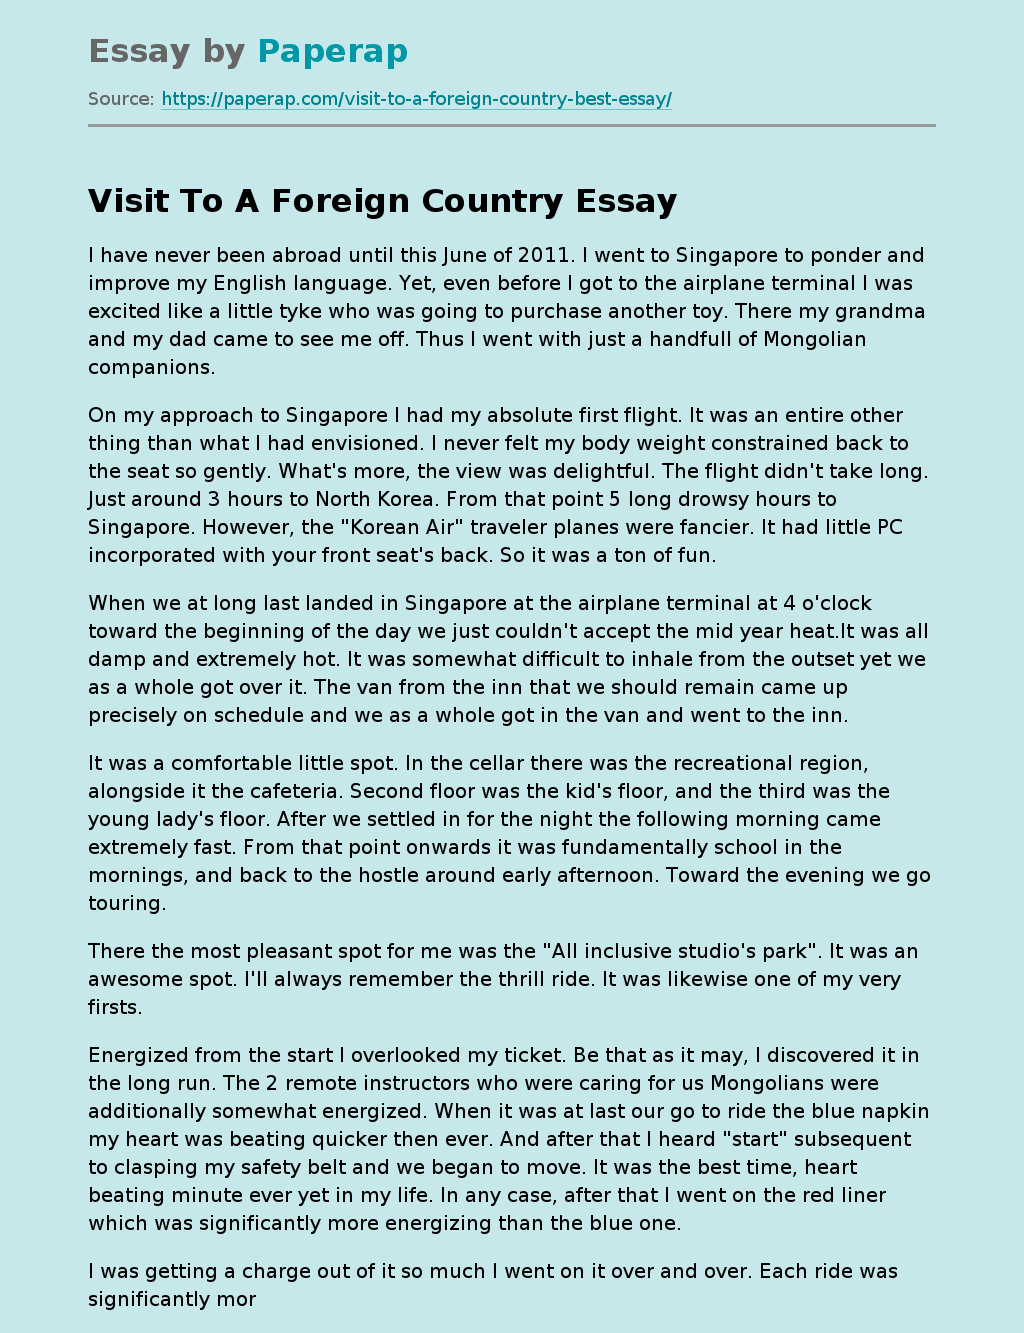 essay on the country you would like to visit